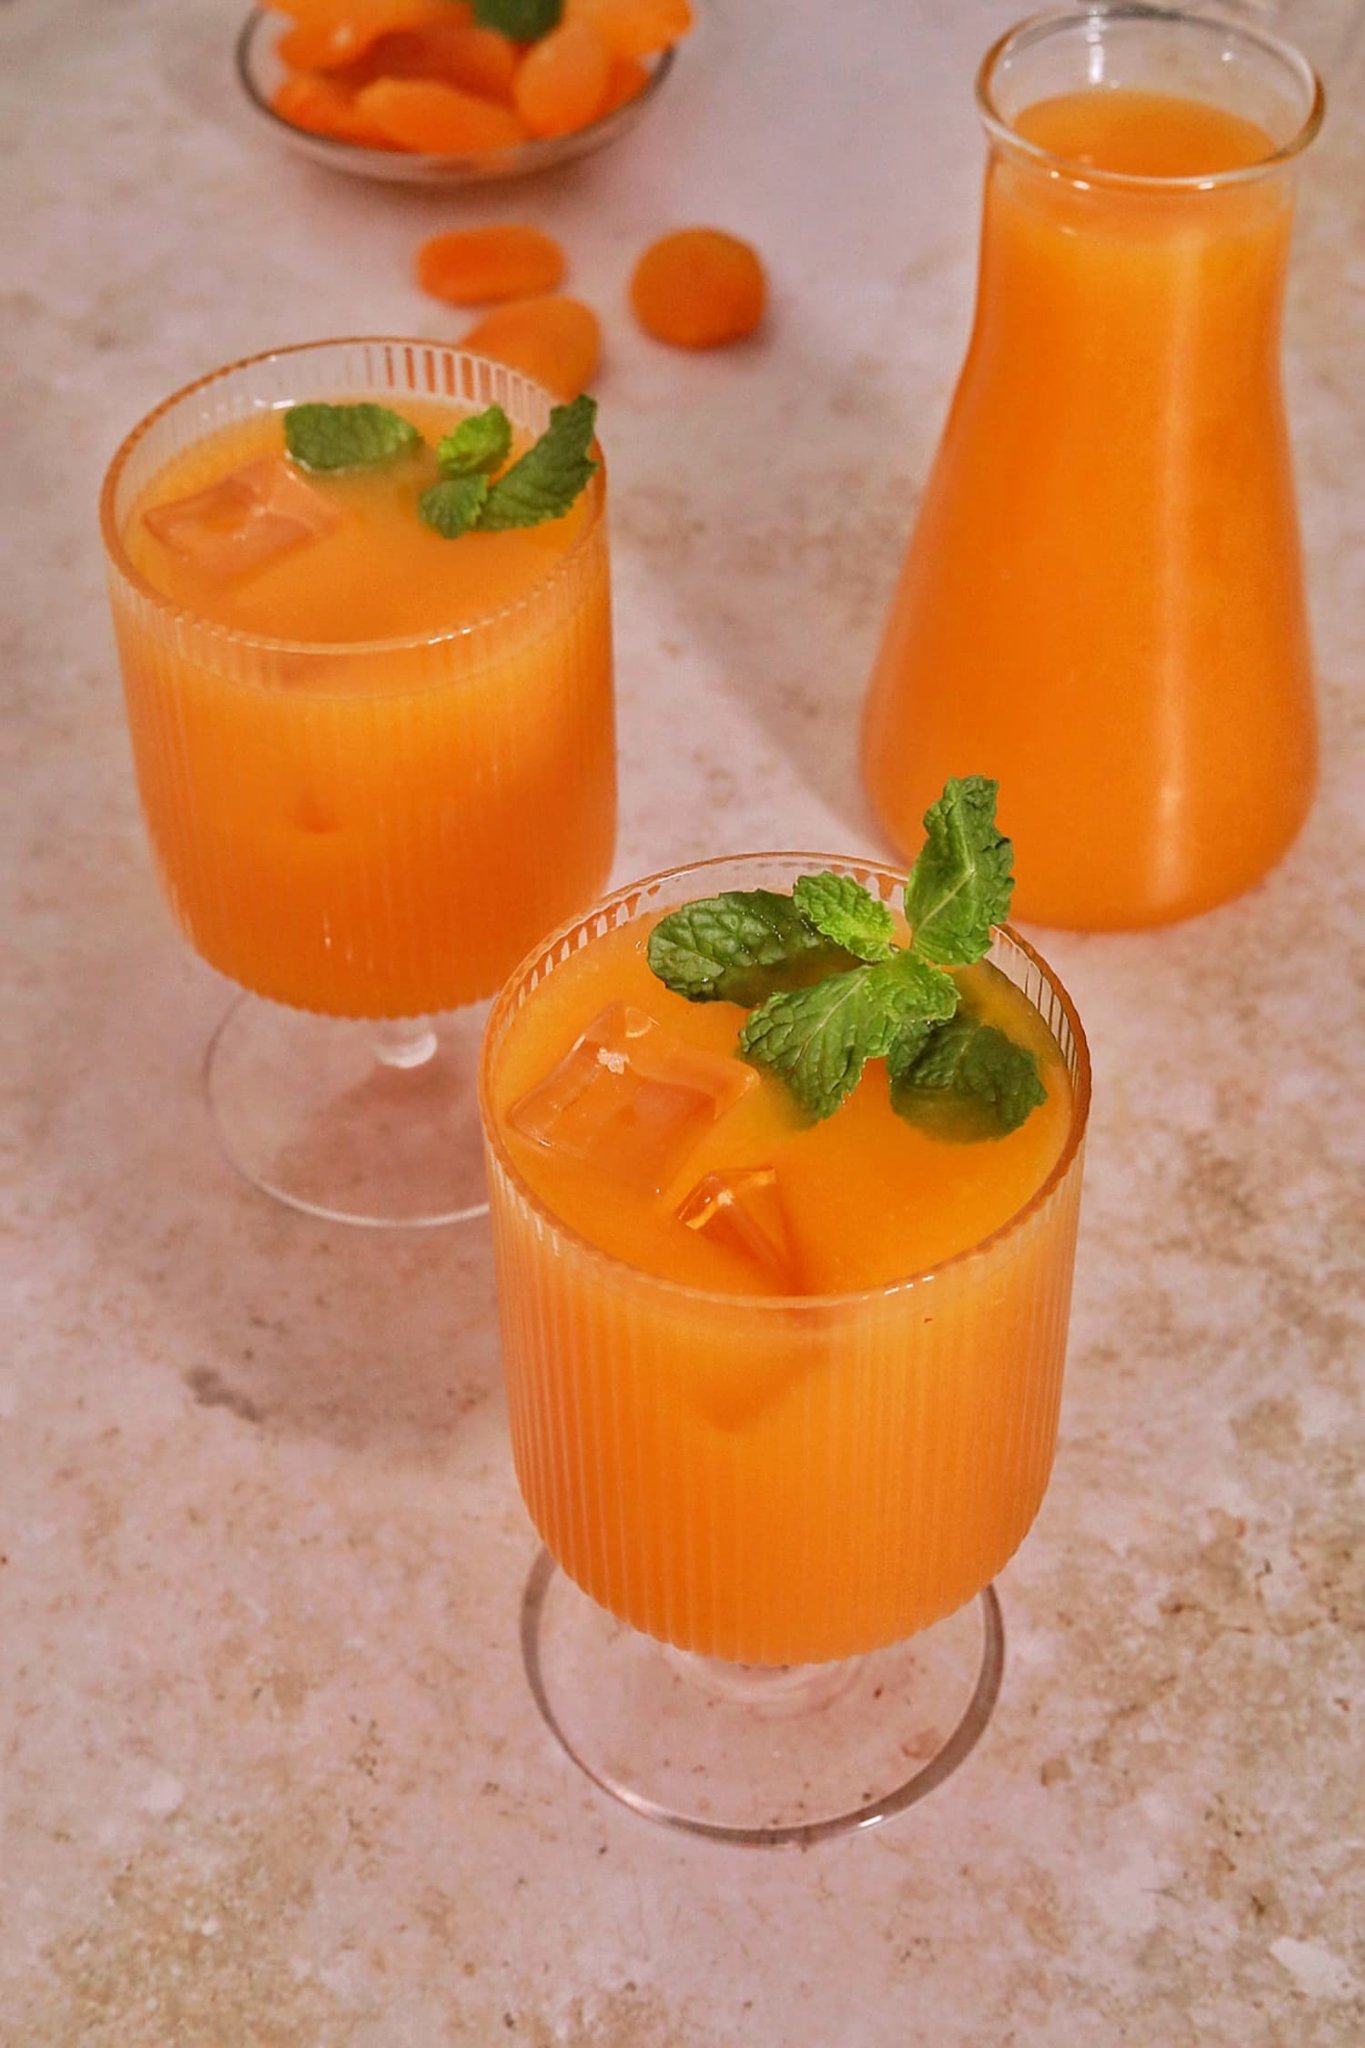 This Sweet, Cold Apricot Drink for Ramadan Is the Perfect Way to Refresh After Fasting